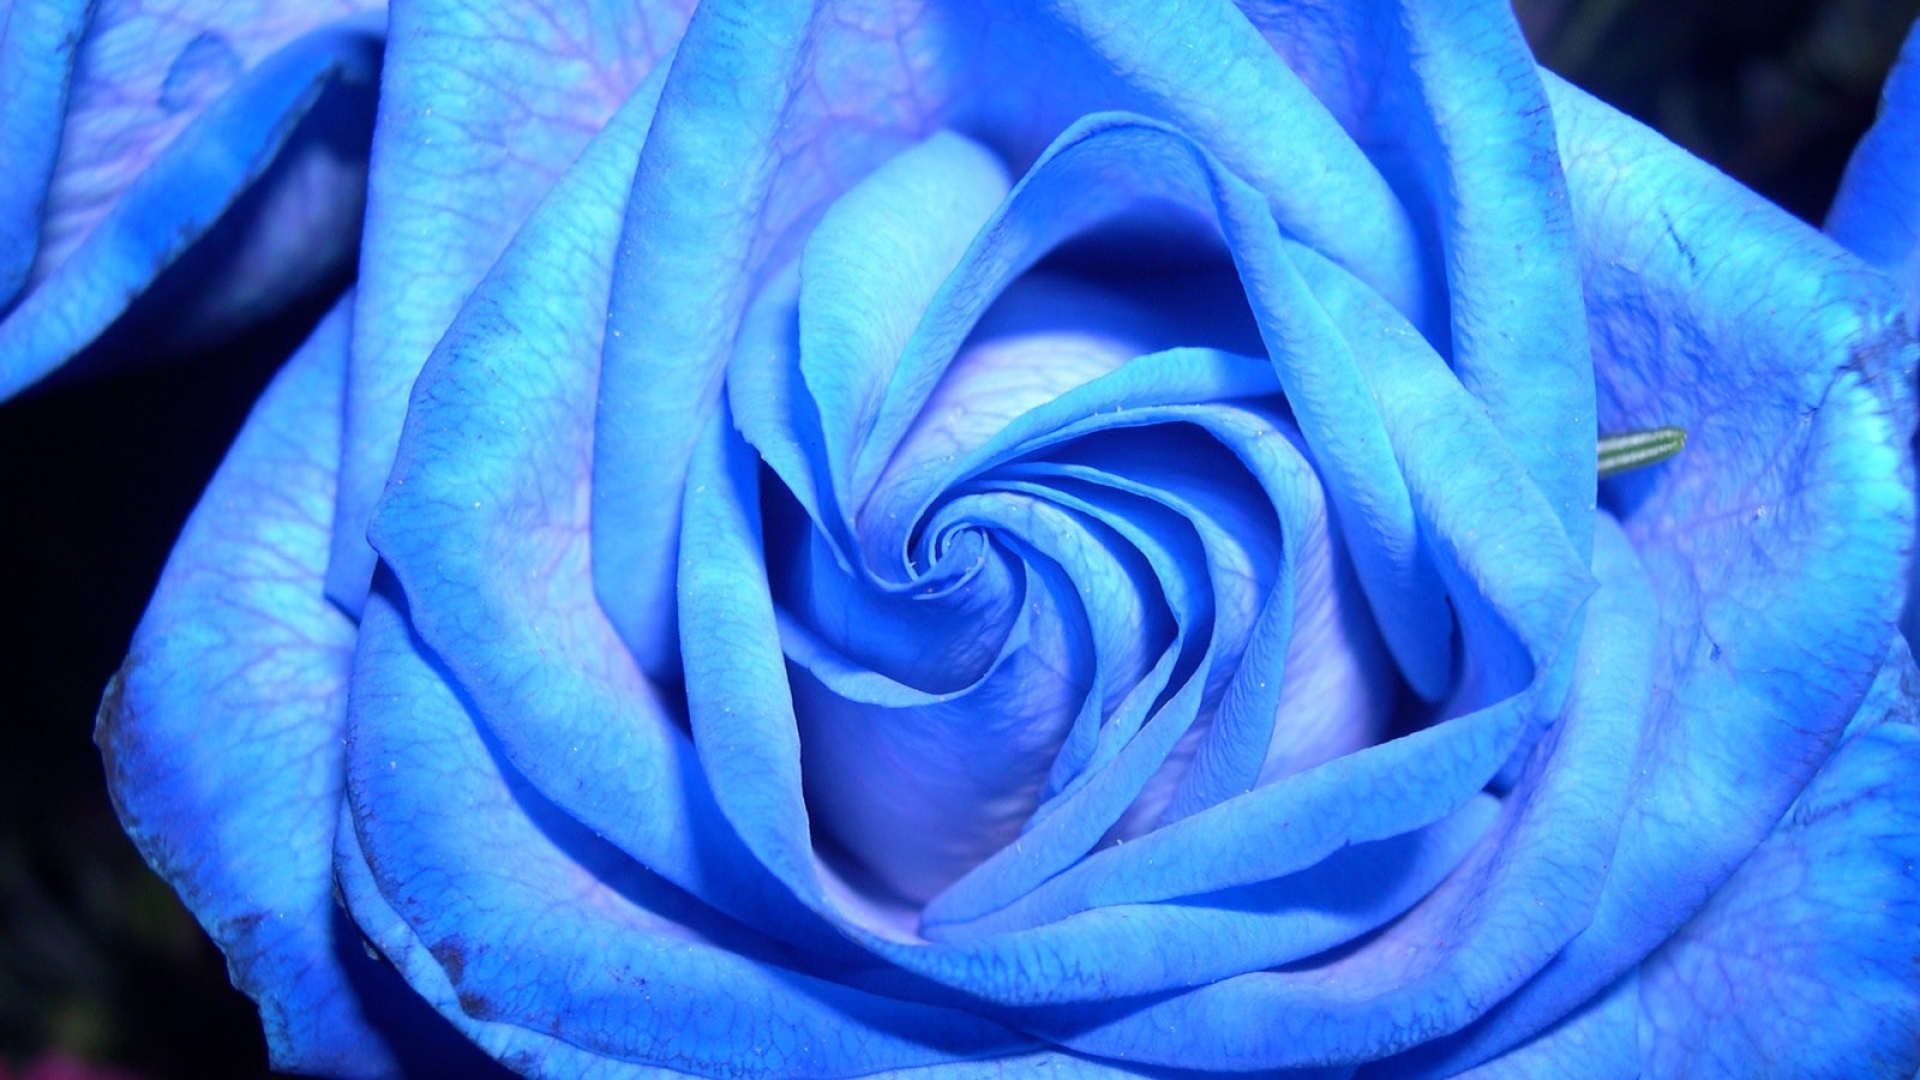 Blue Rose On A Dark Background Wallpaper And Image